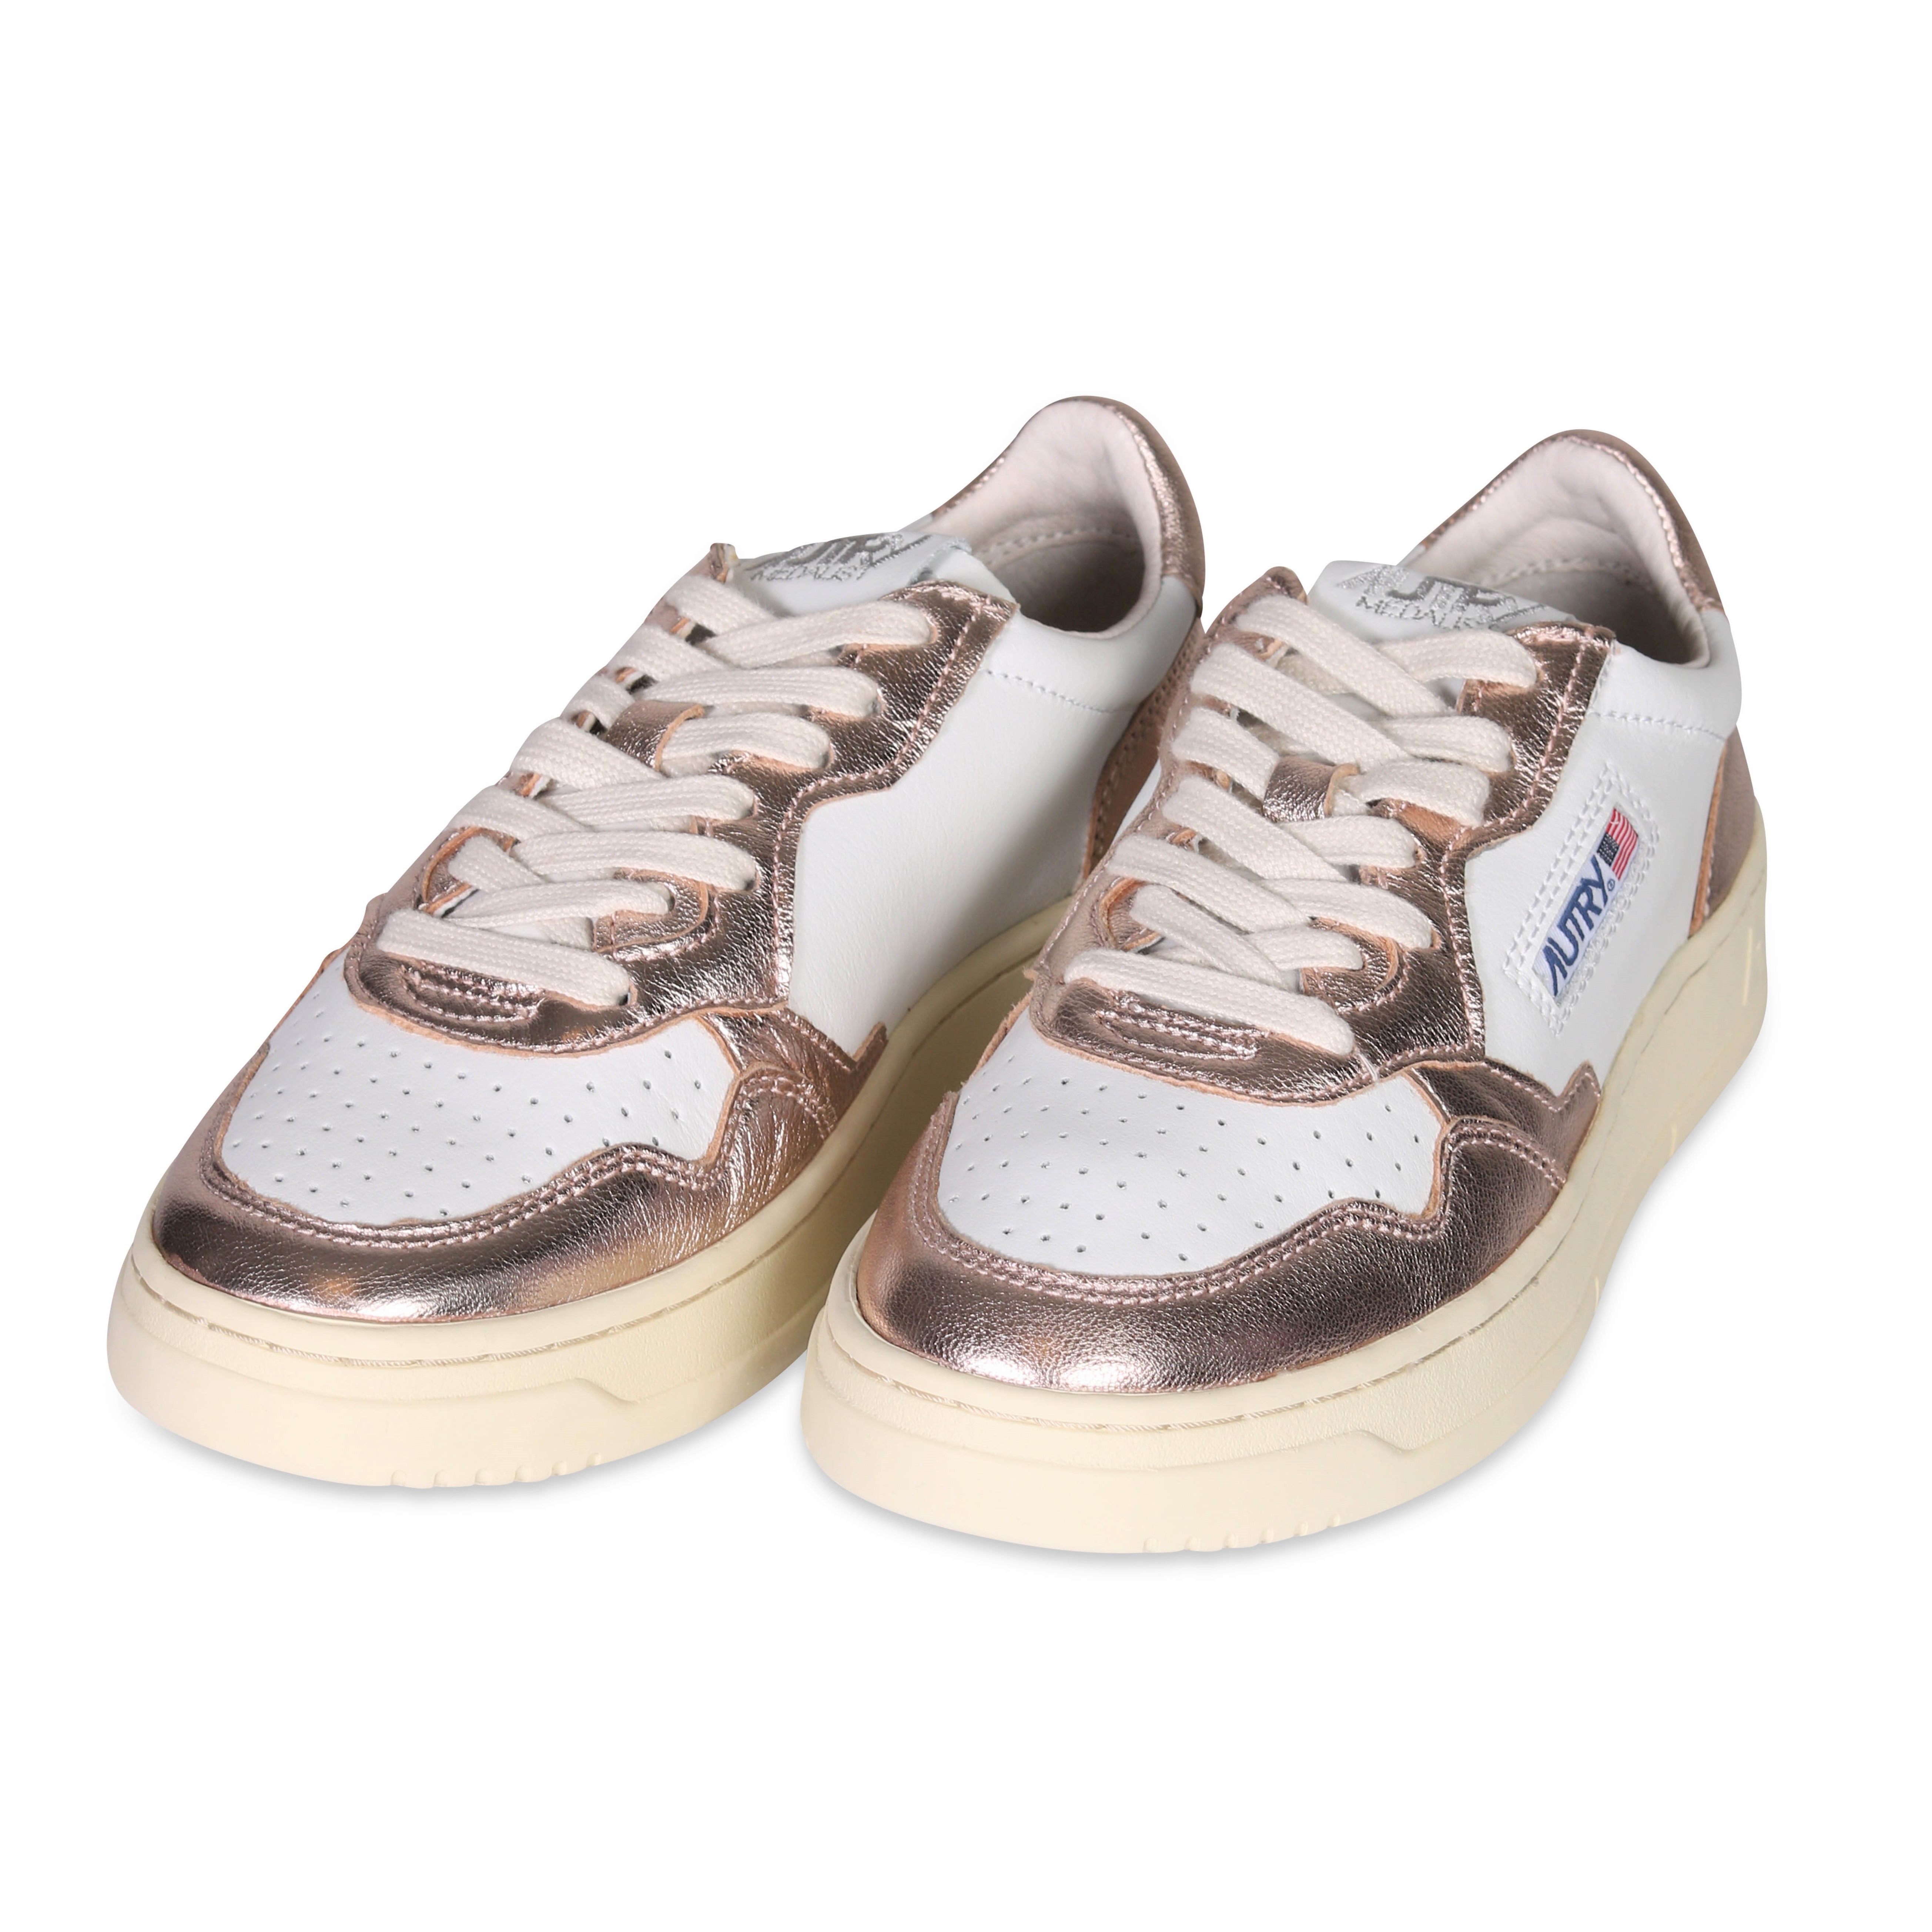 Autry Action Shoes Low Sneaker White/Copper